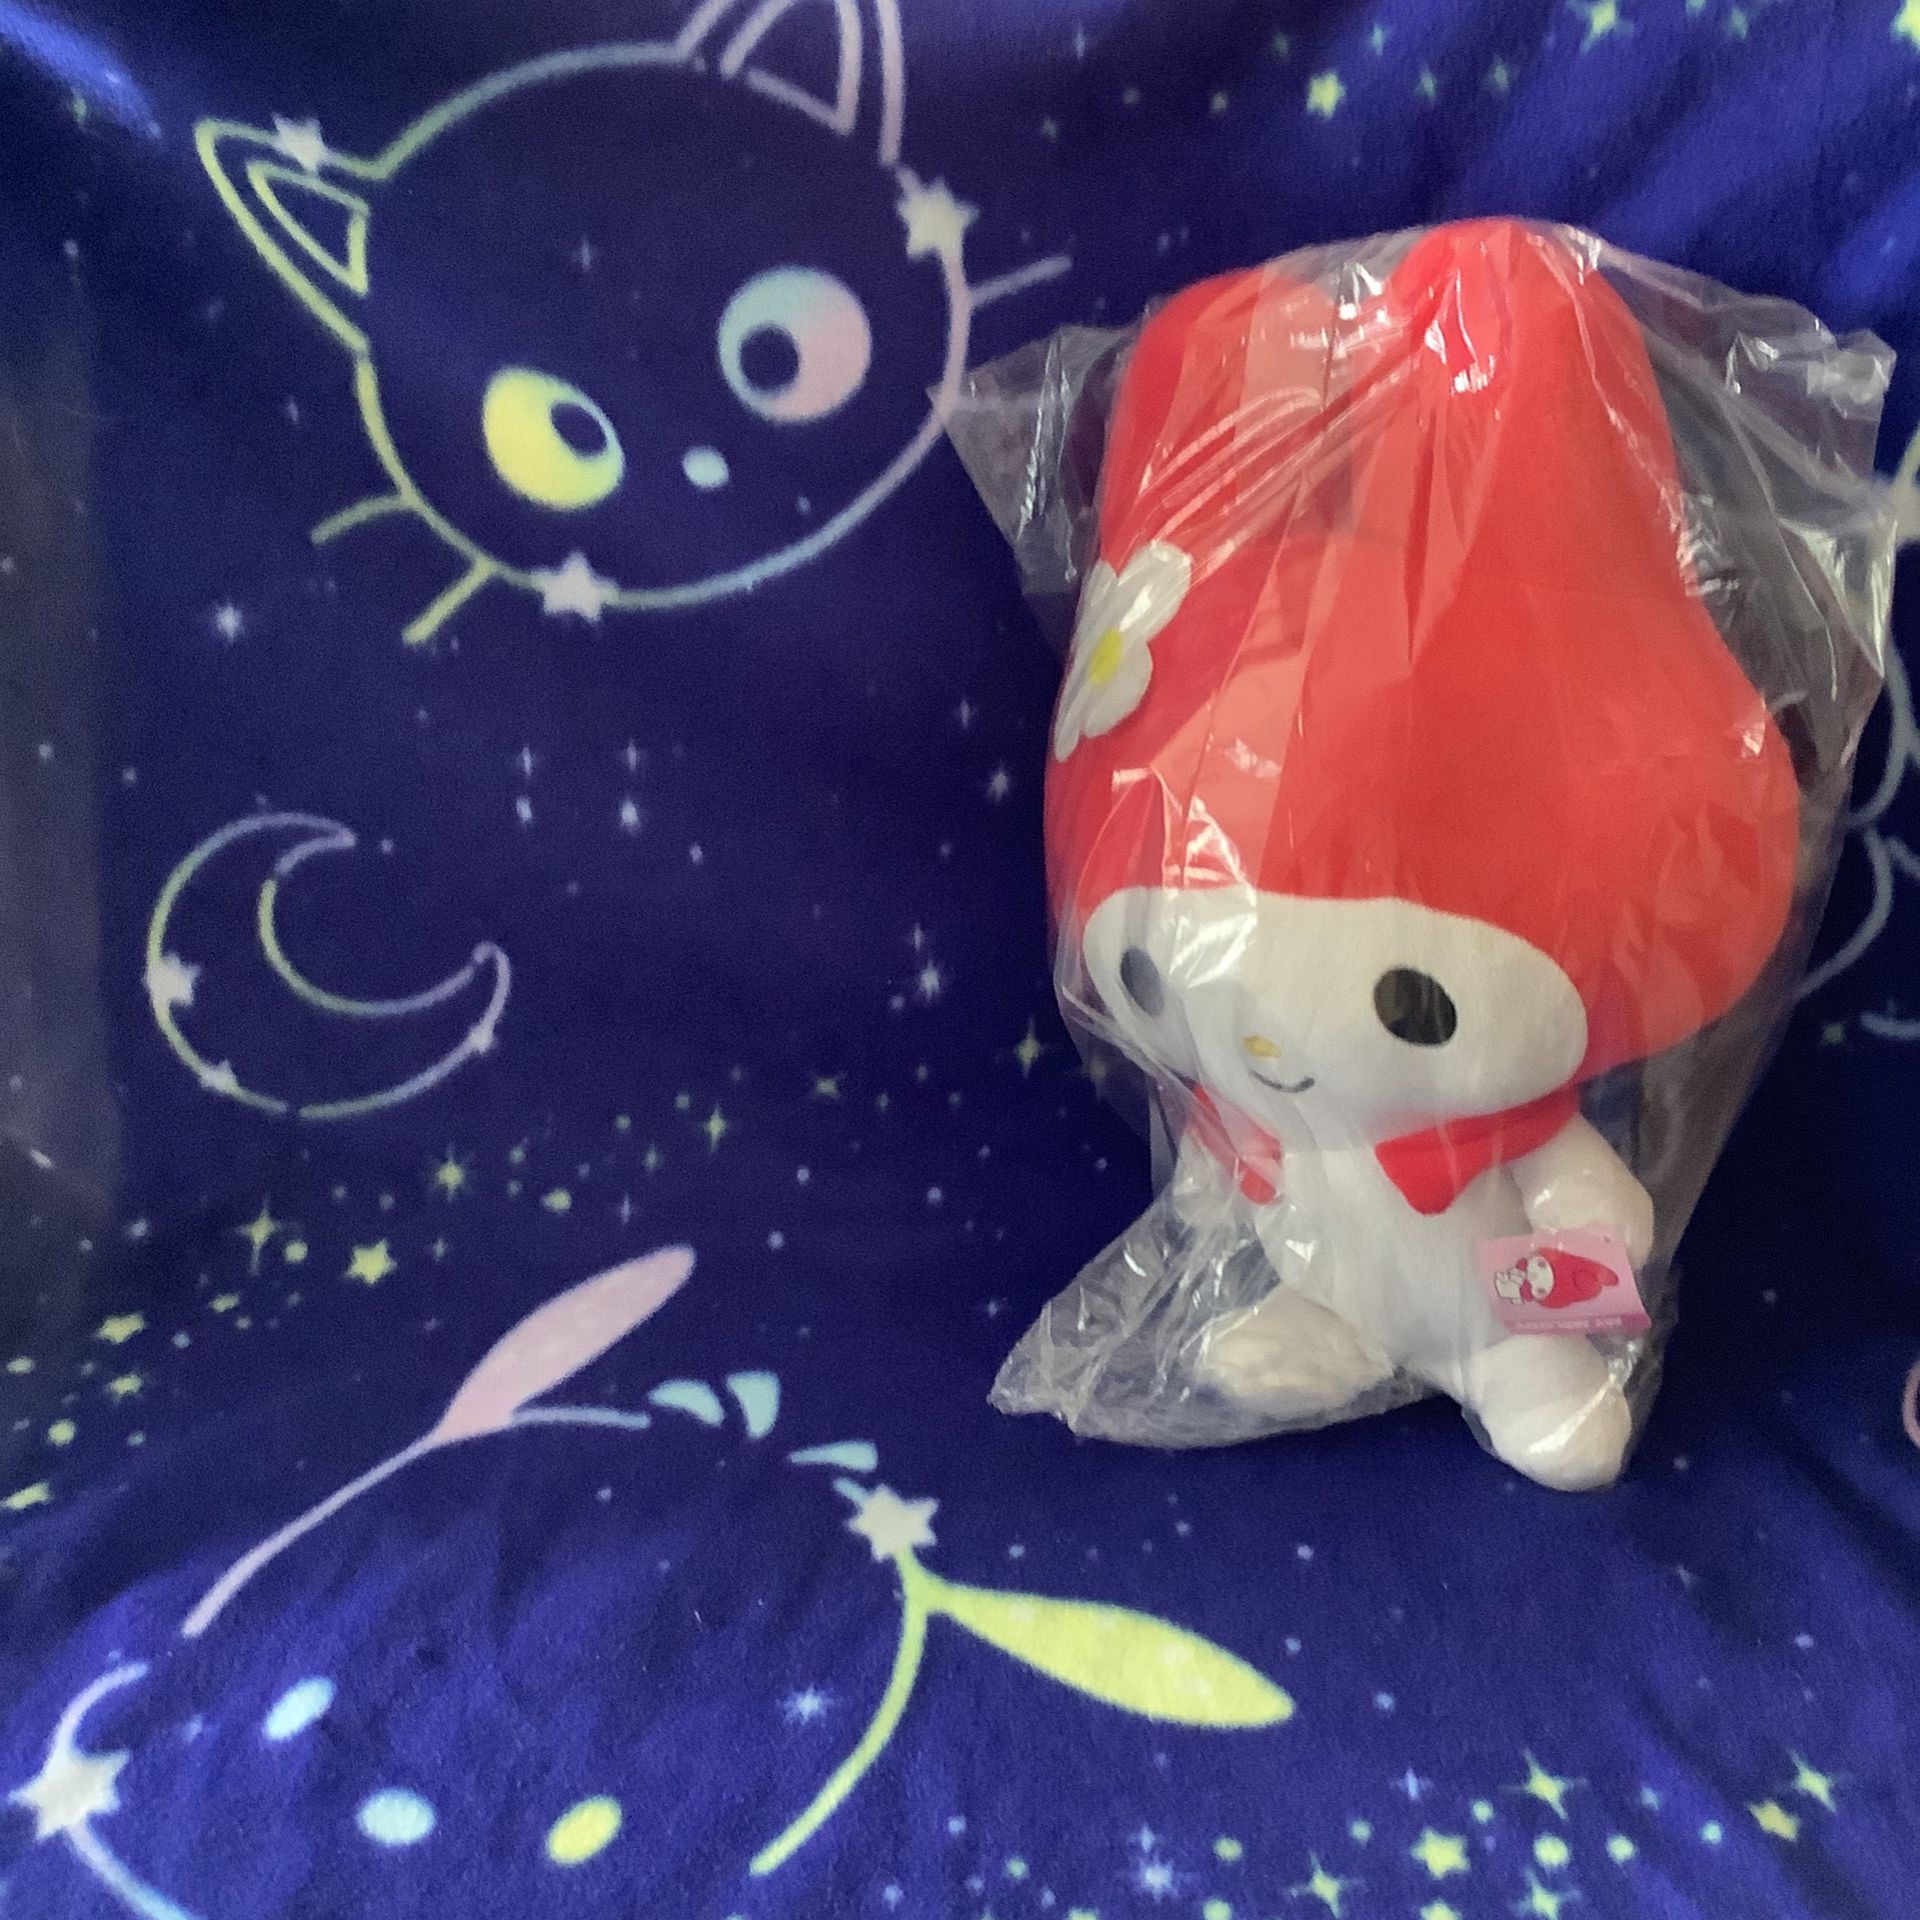 MY MELODY   17” TALL PLUSHIE    BY SANRIO   NWT          INCLUDES OLD TWIN STARS THROW BLANKET